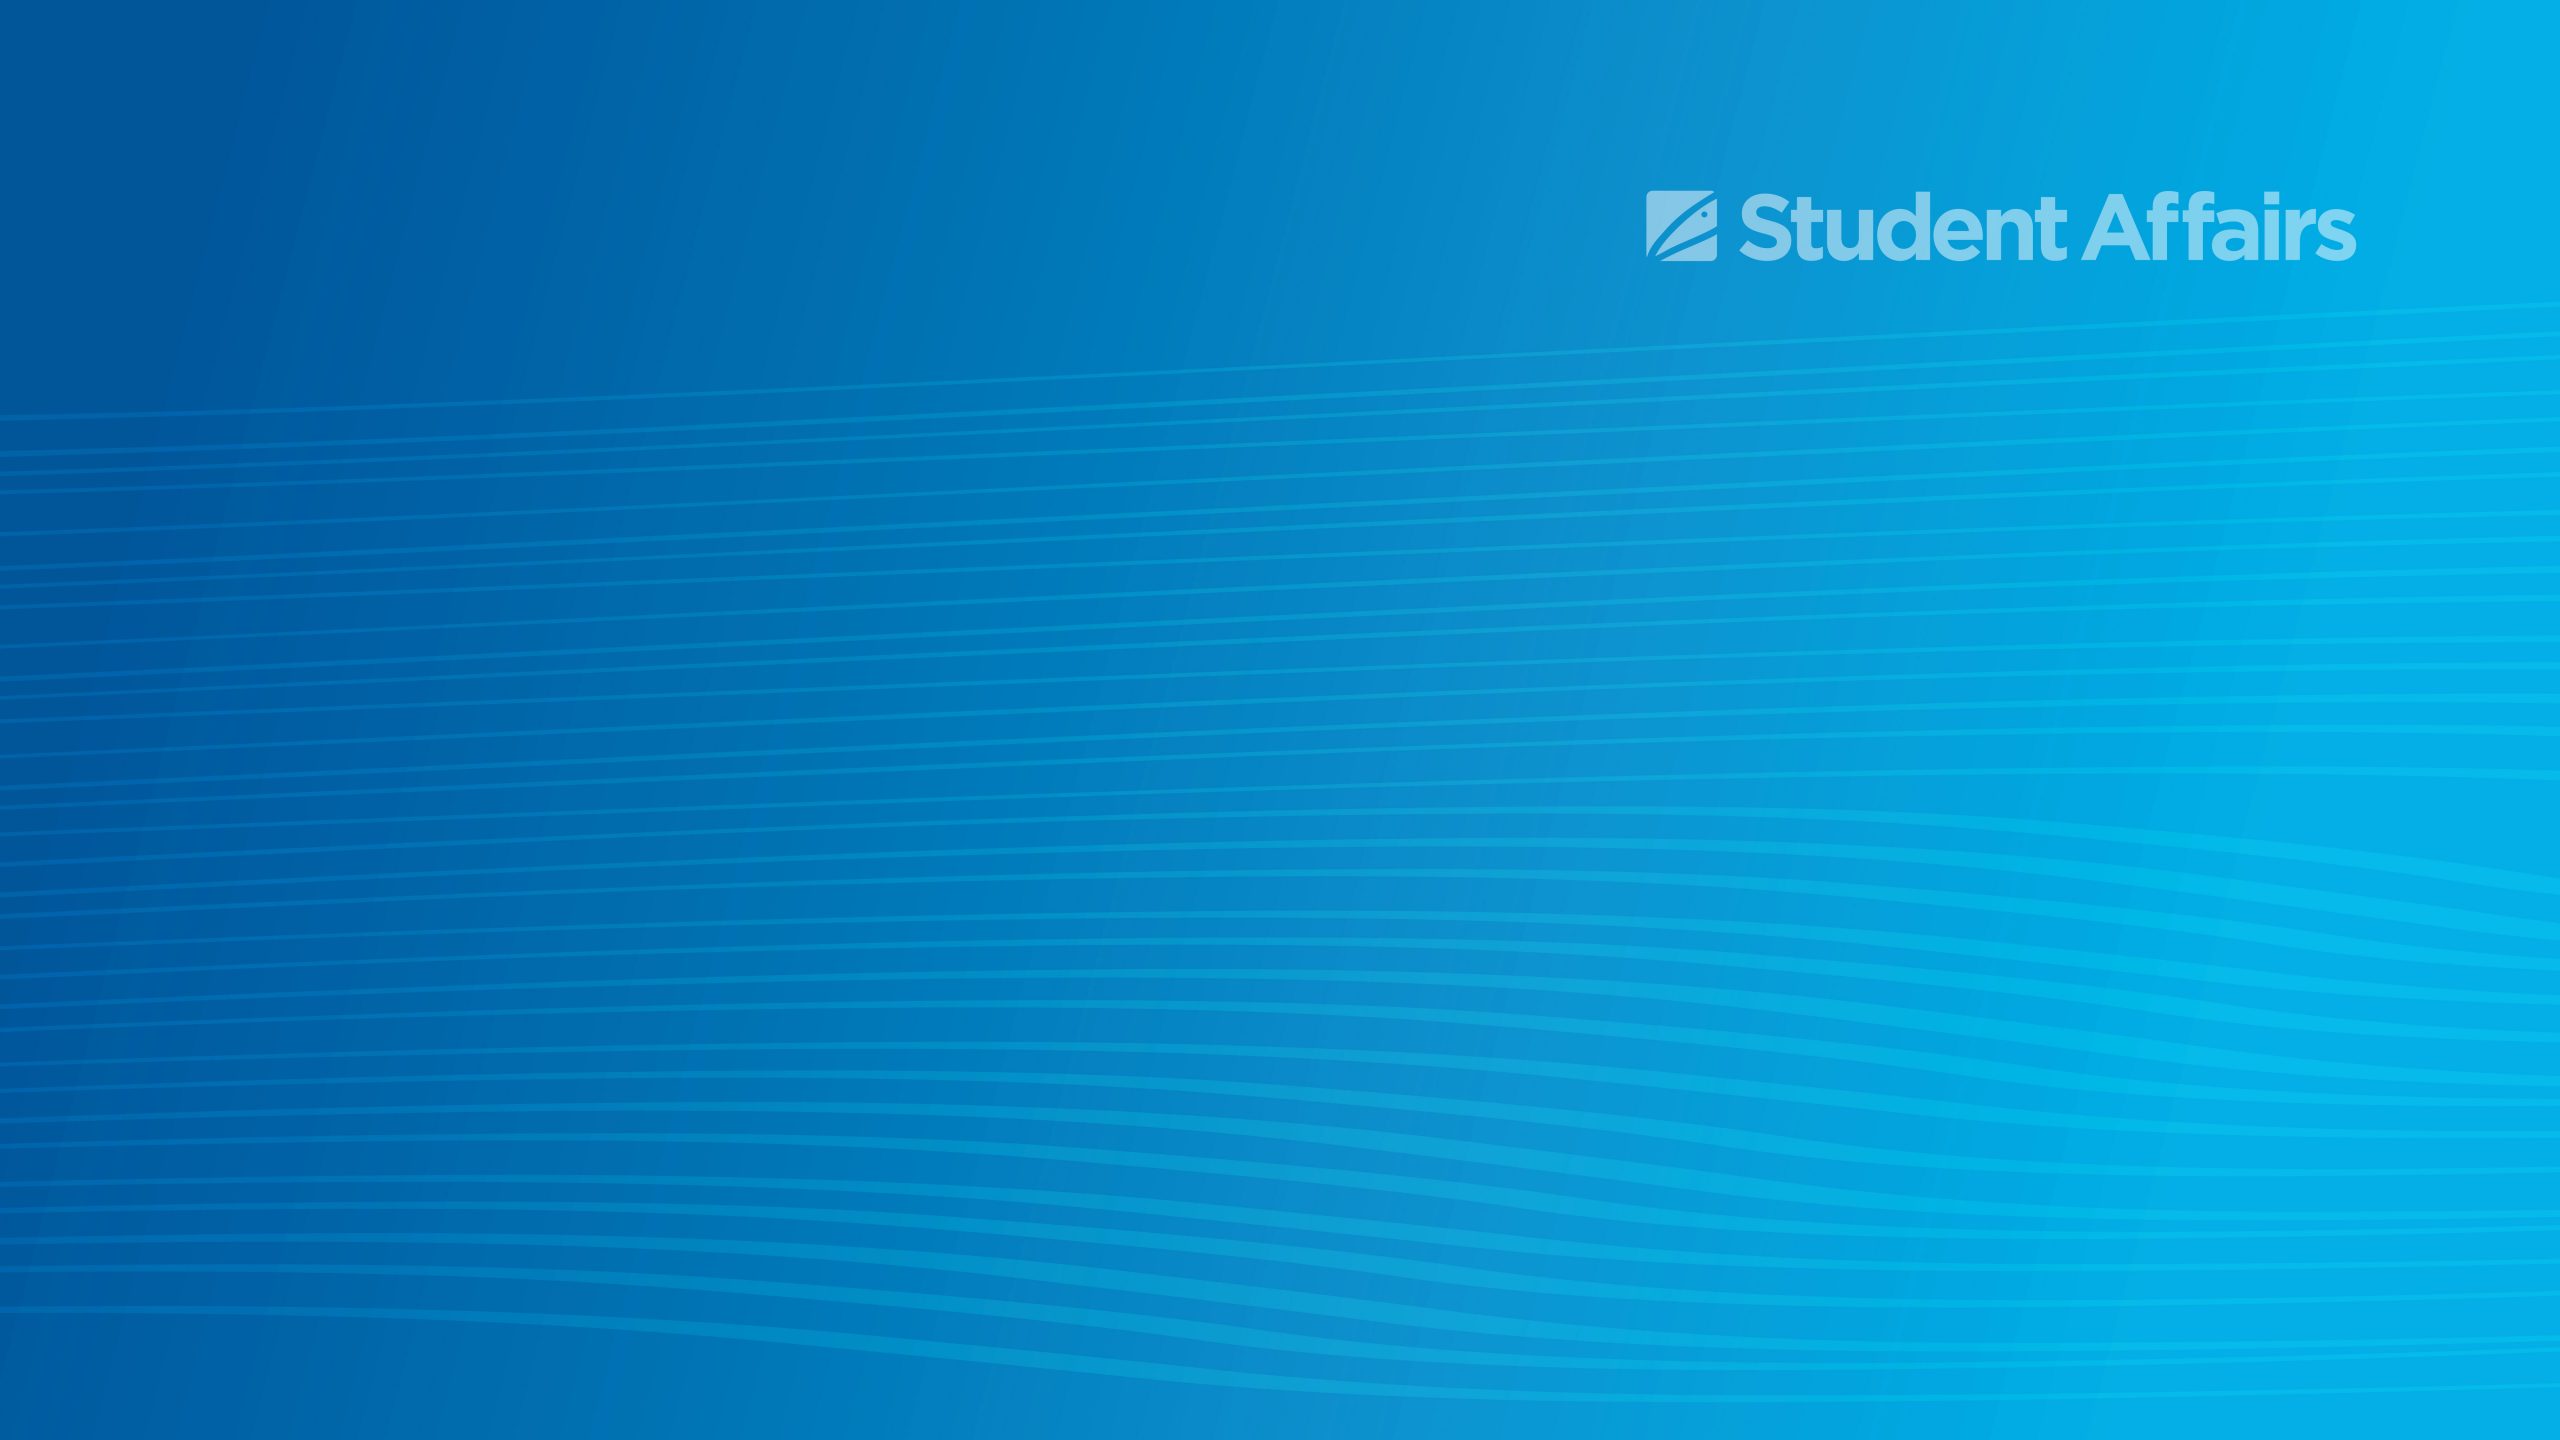 Blue gradient with Student Affairs graphic and light white wavy lines in a pattern throughout background